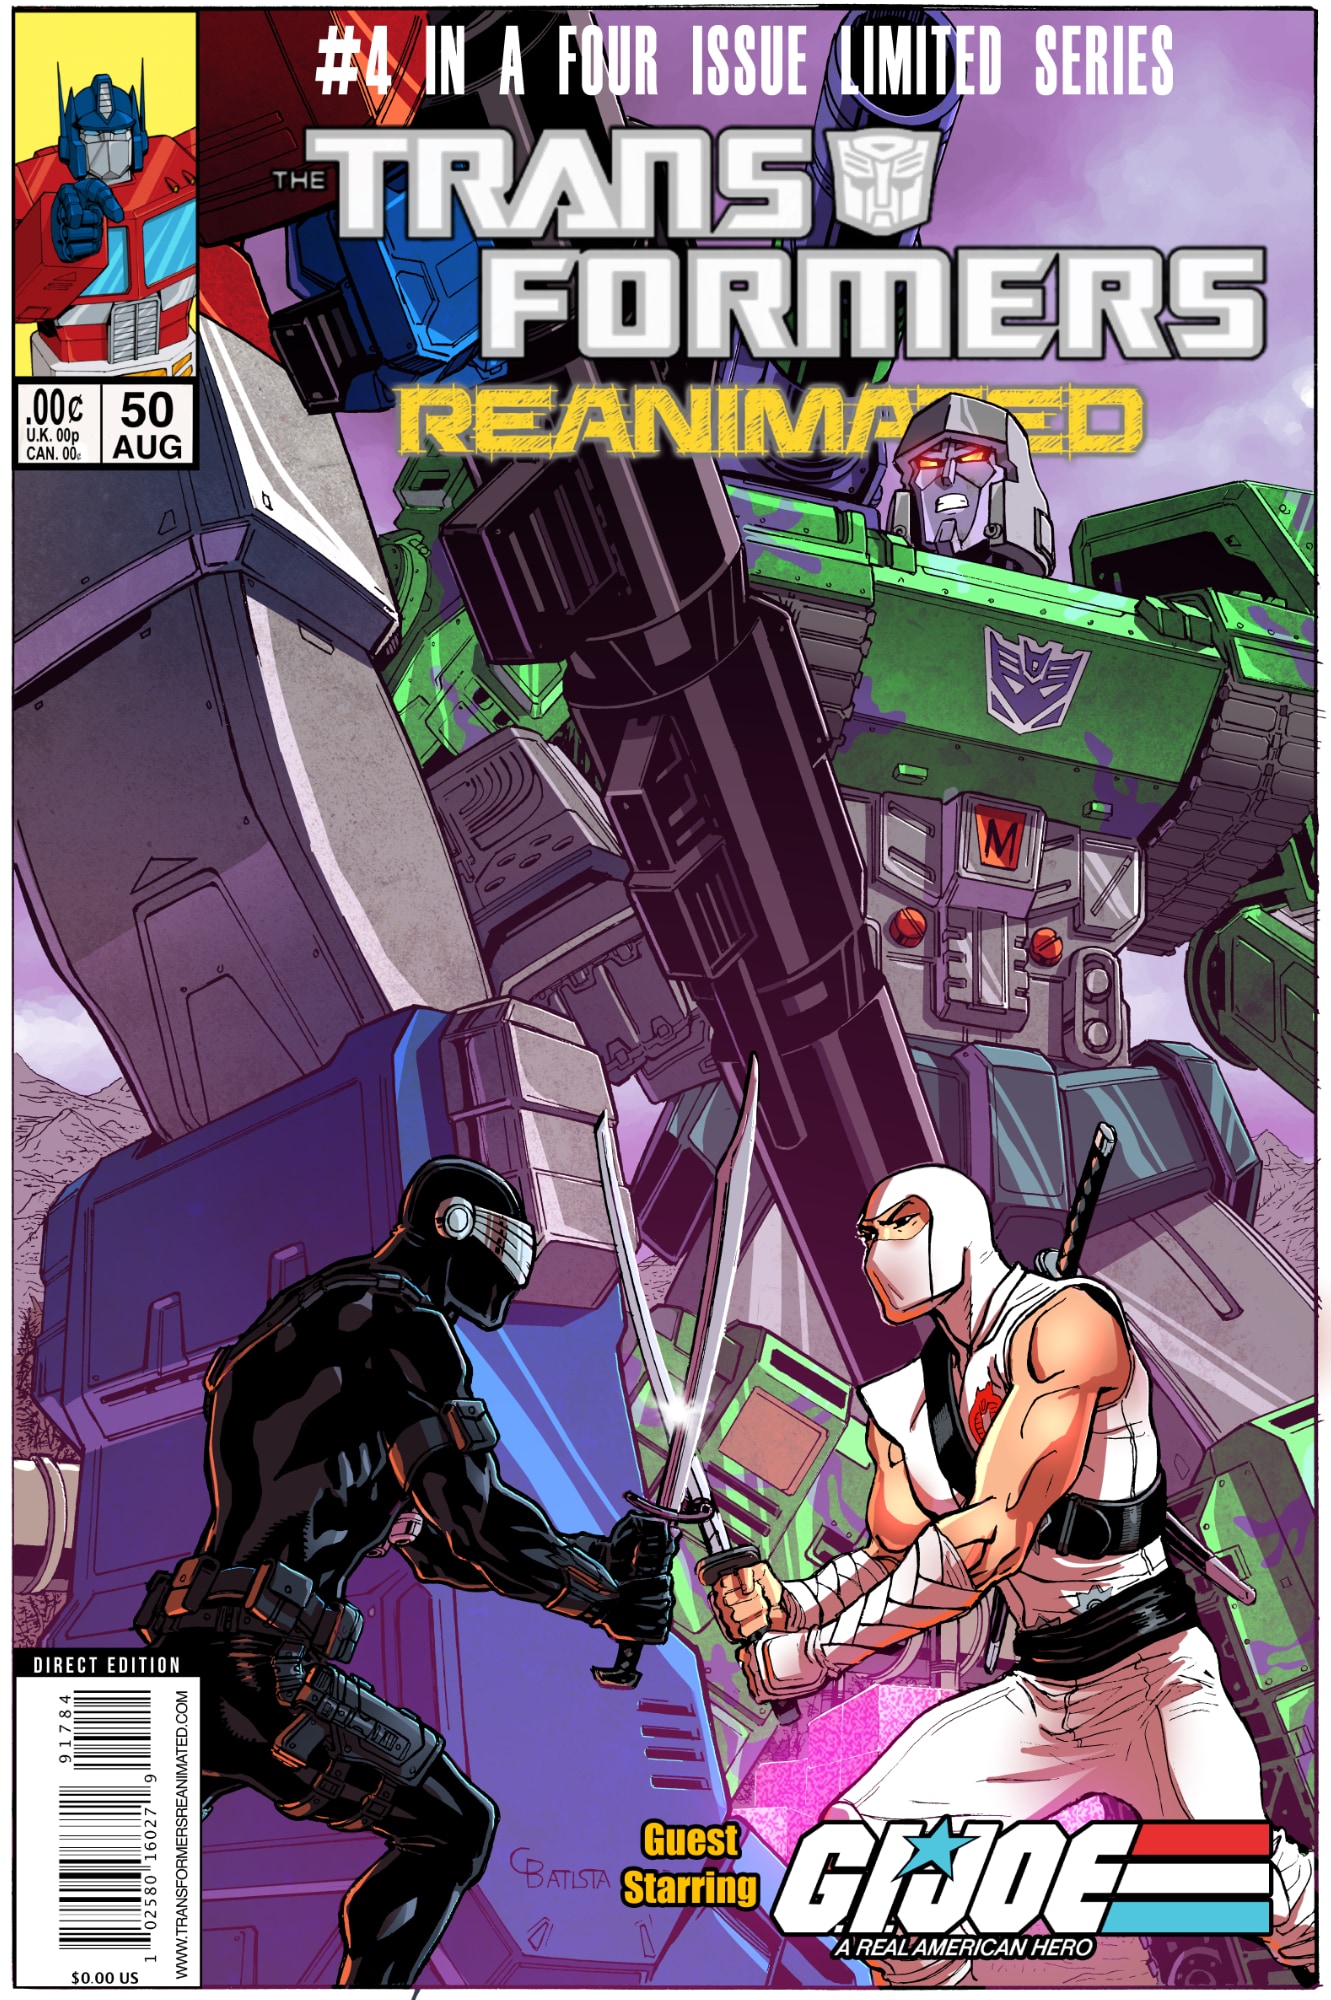 Transformers comic cover with Snake-eyes and Storm Shadow squaring off in the foreground with Otpimus Prime and Megatron squaring off in the background